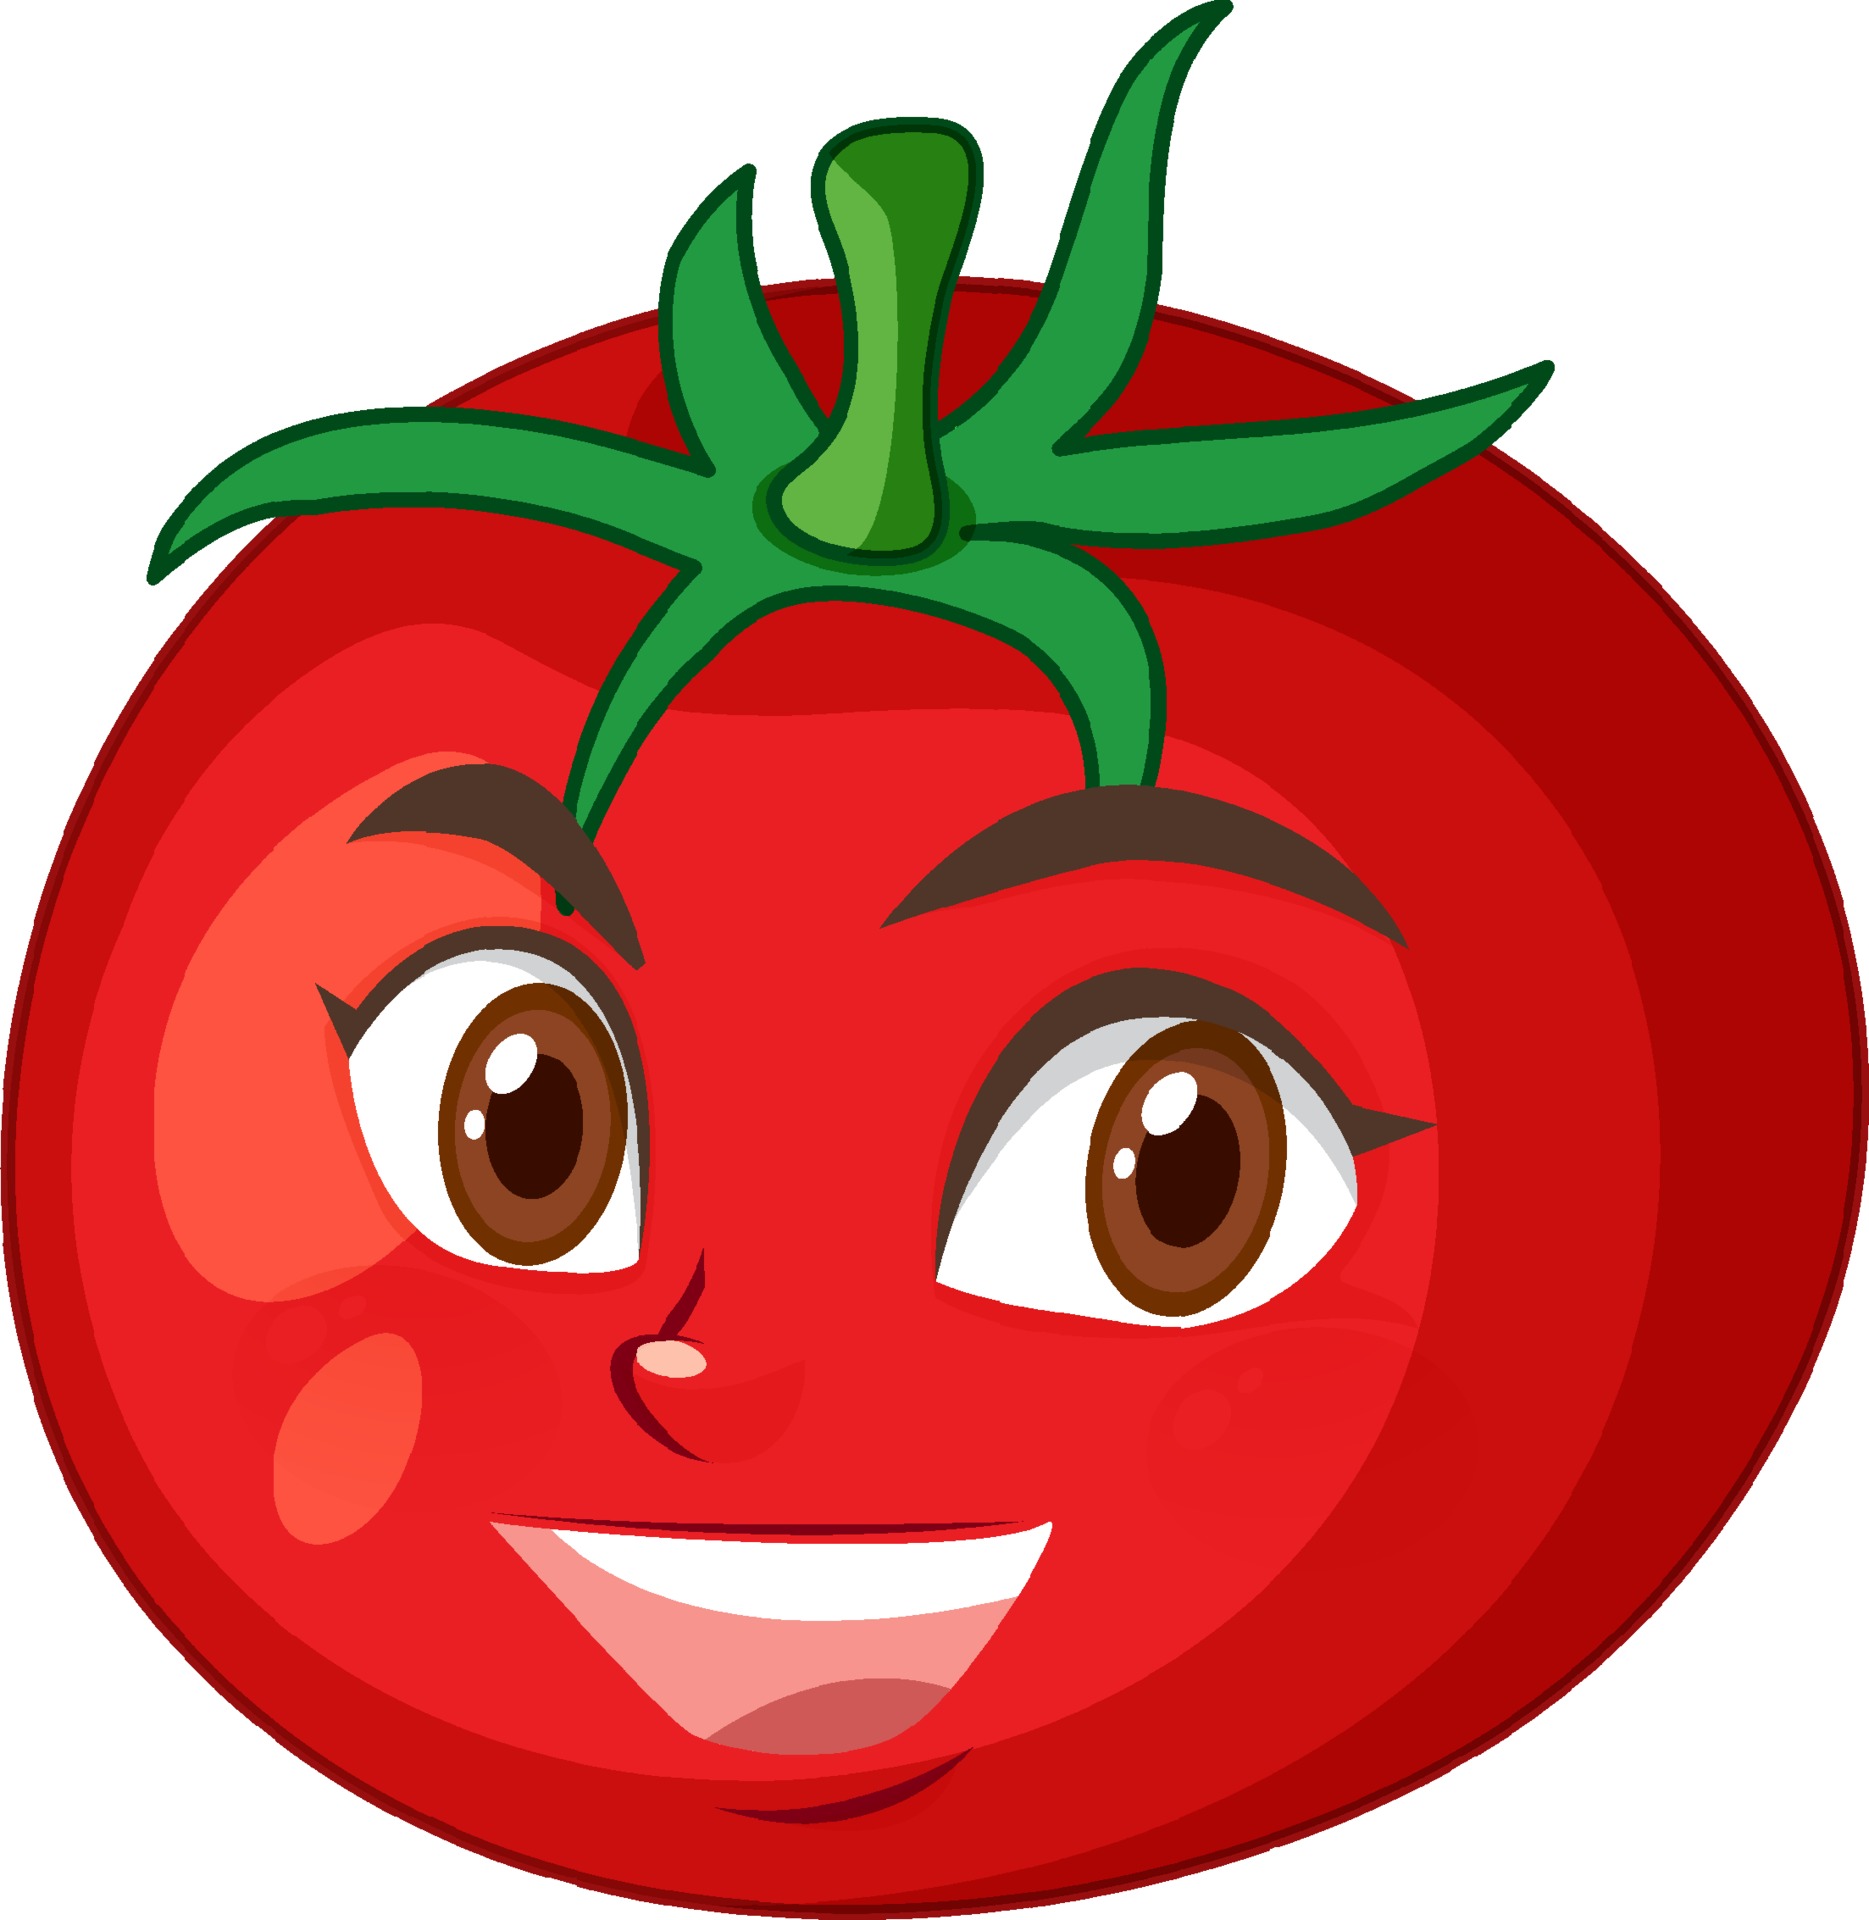 Tomato Cartoon Vector Art, Icons, and Graphics for Free Download